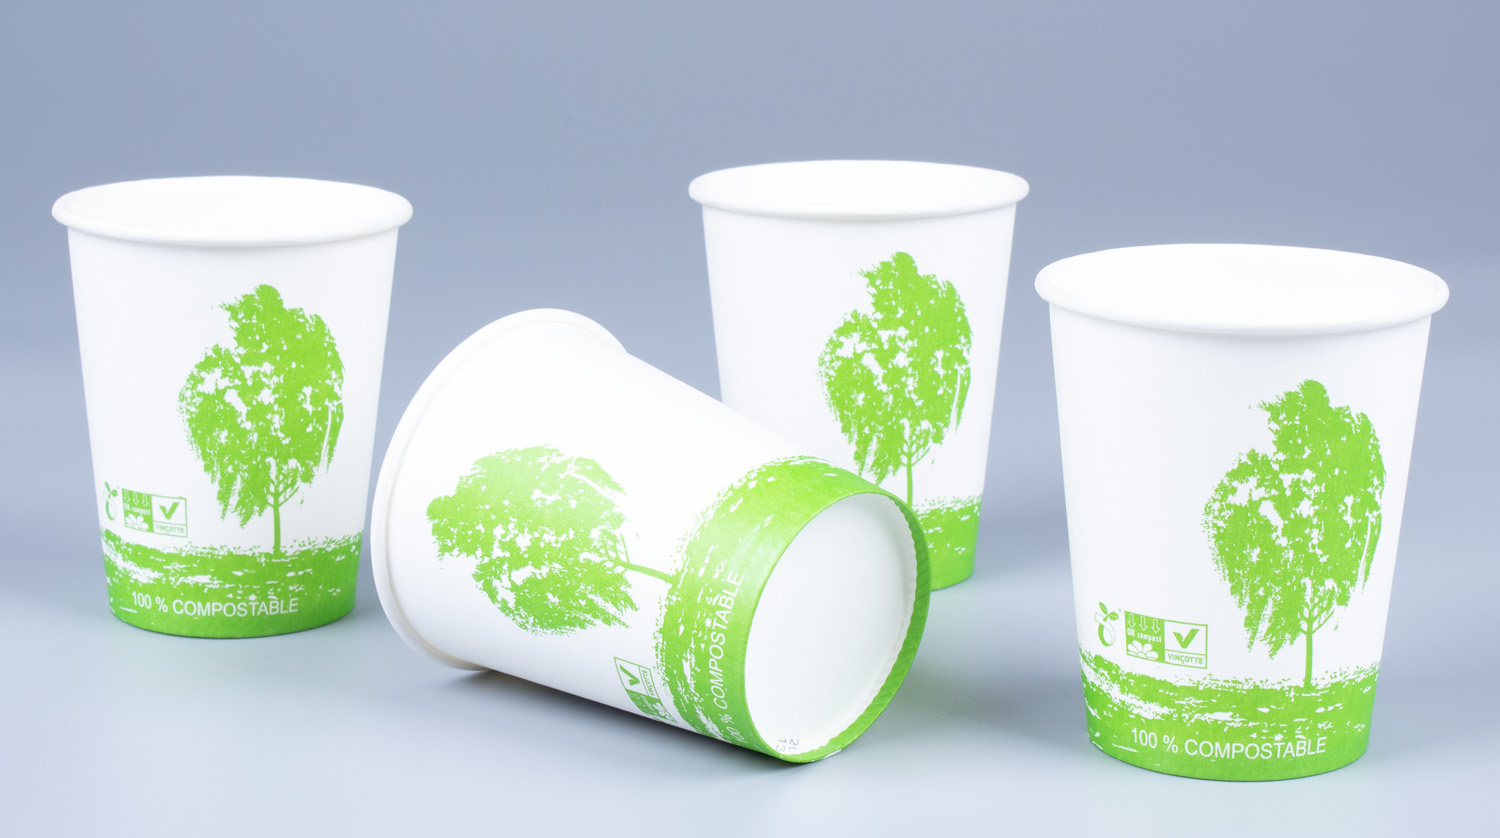 Green & Good Paper Cup 8oz - Recyclable